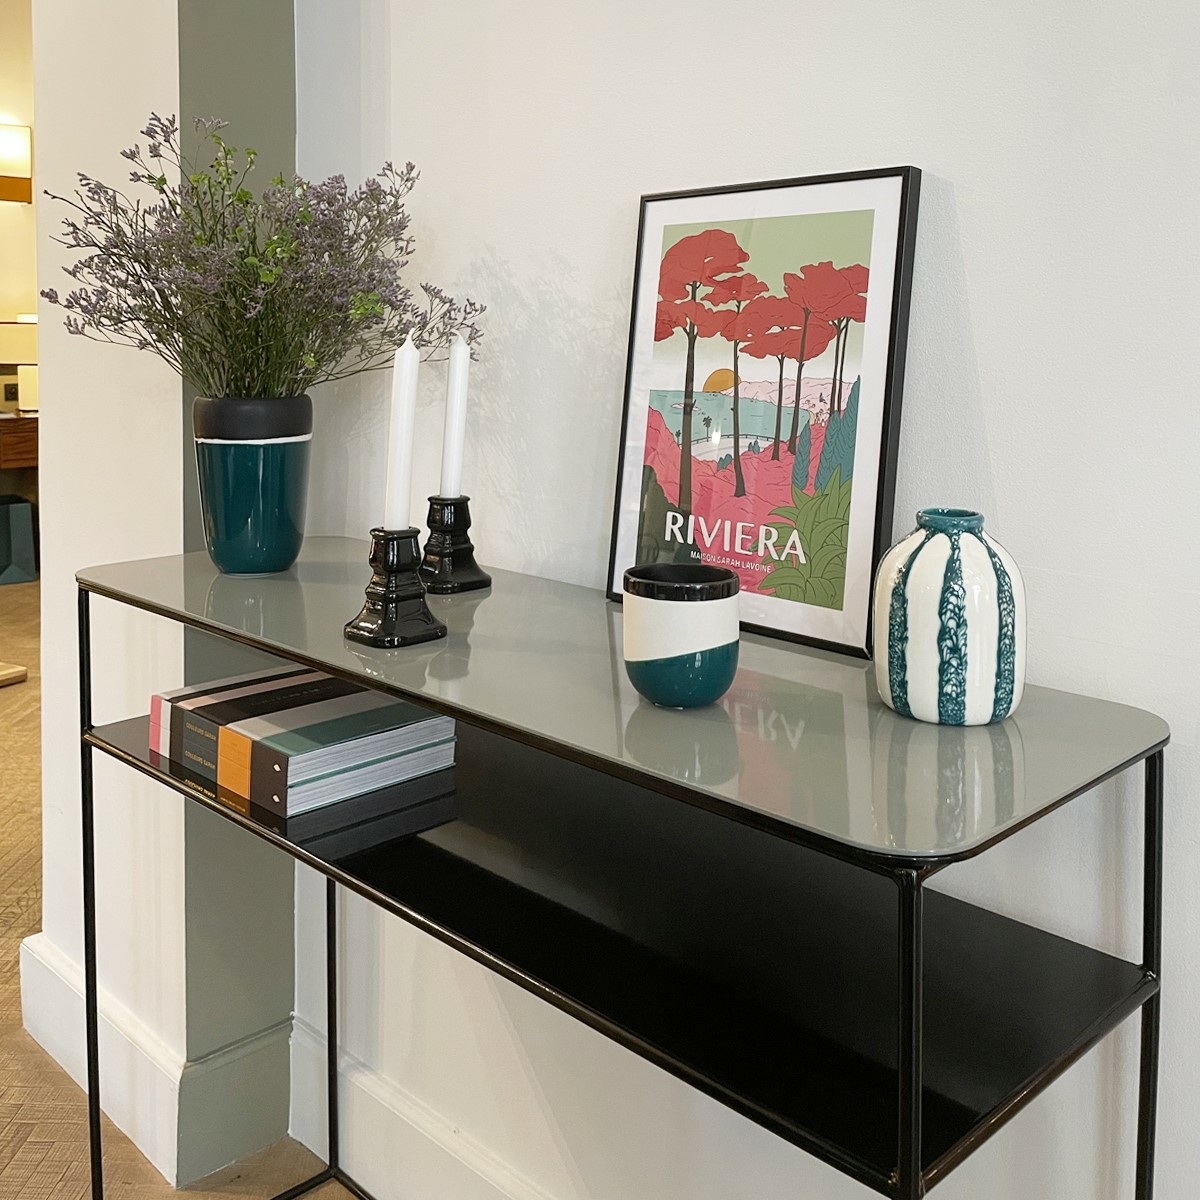 Console Table Double Jeu, Thyme / Black - W110 x D35 x H85 cm - Powder coated steel - image 3